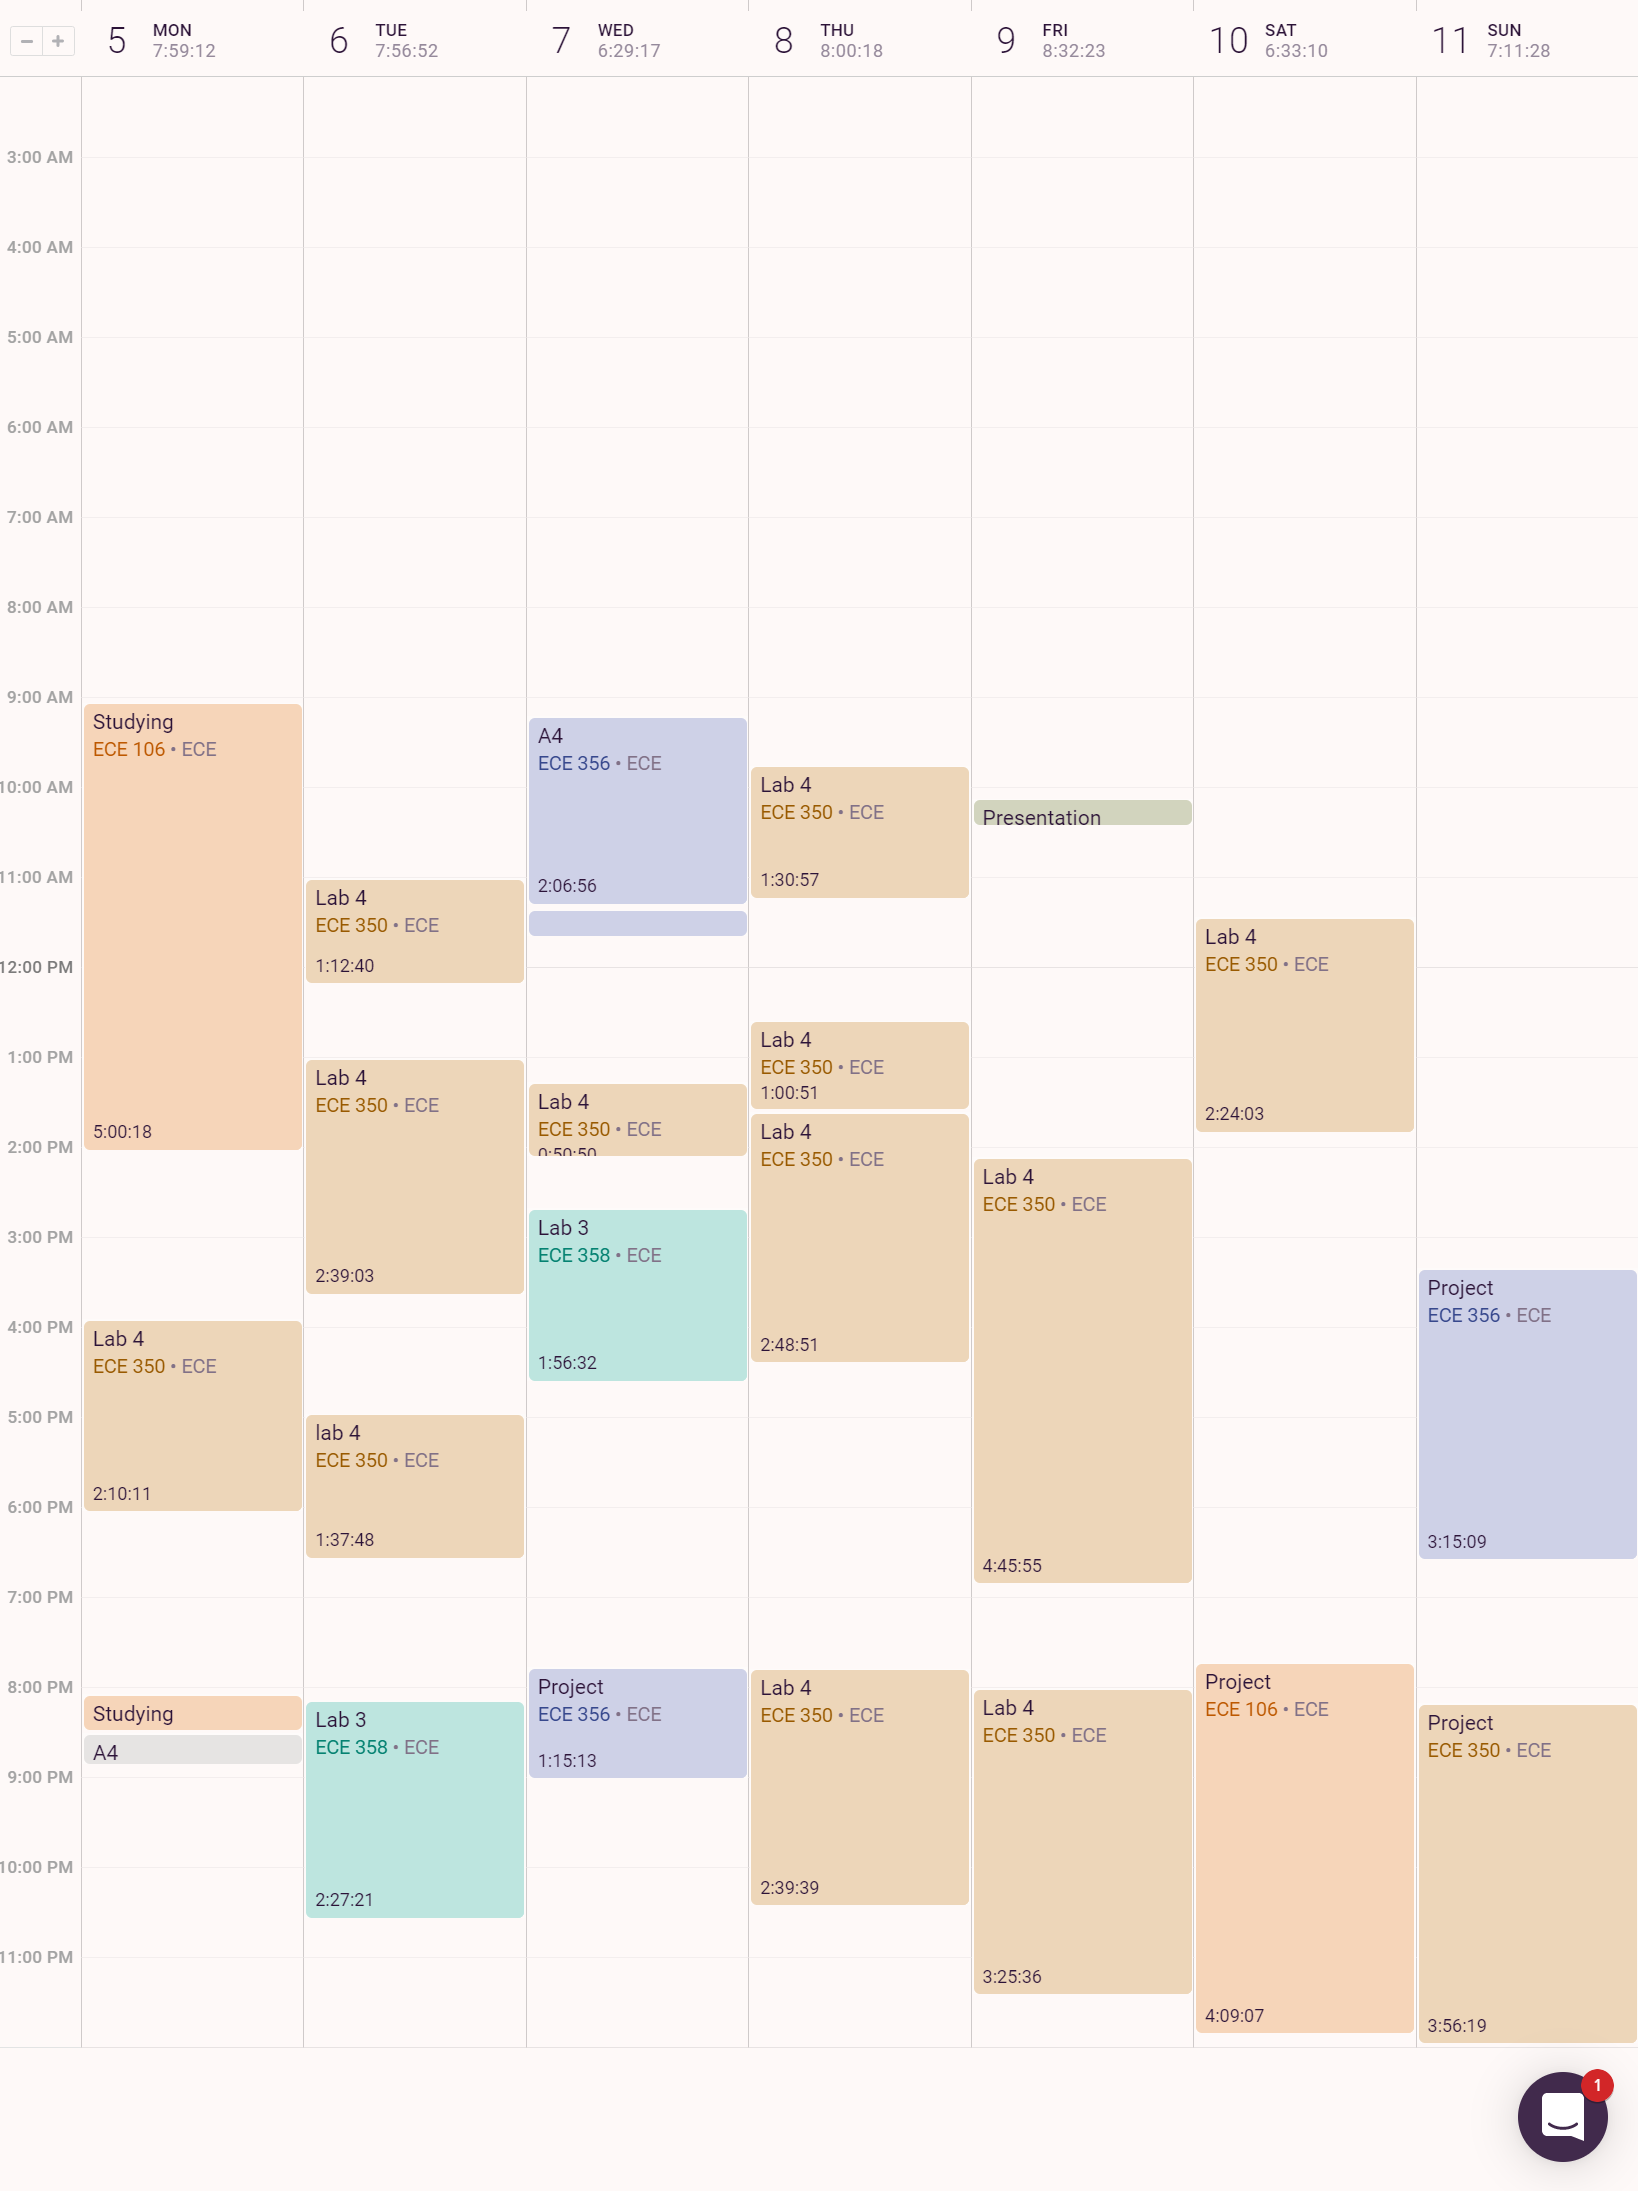 Here’s what my daily schedule looked like during that week